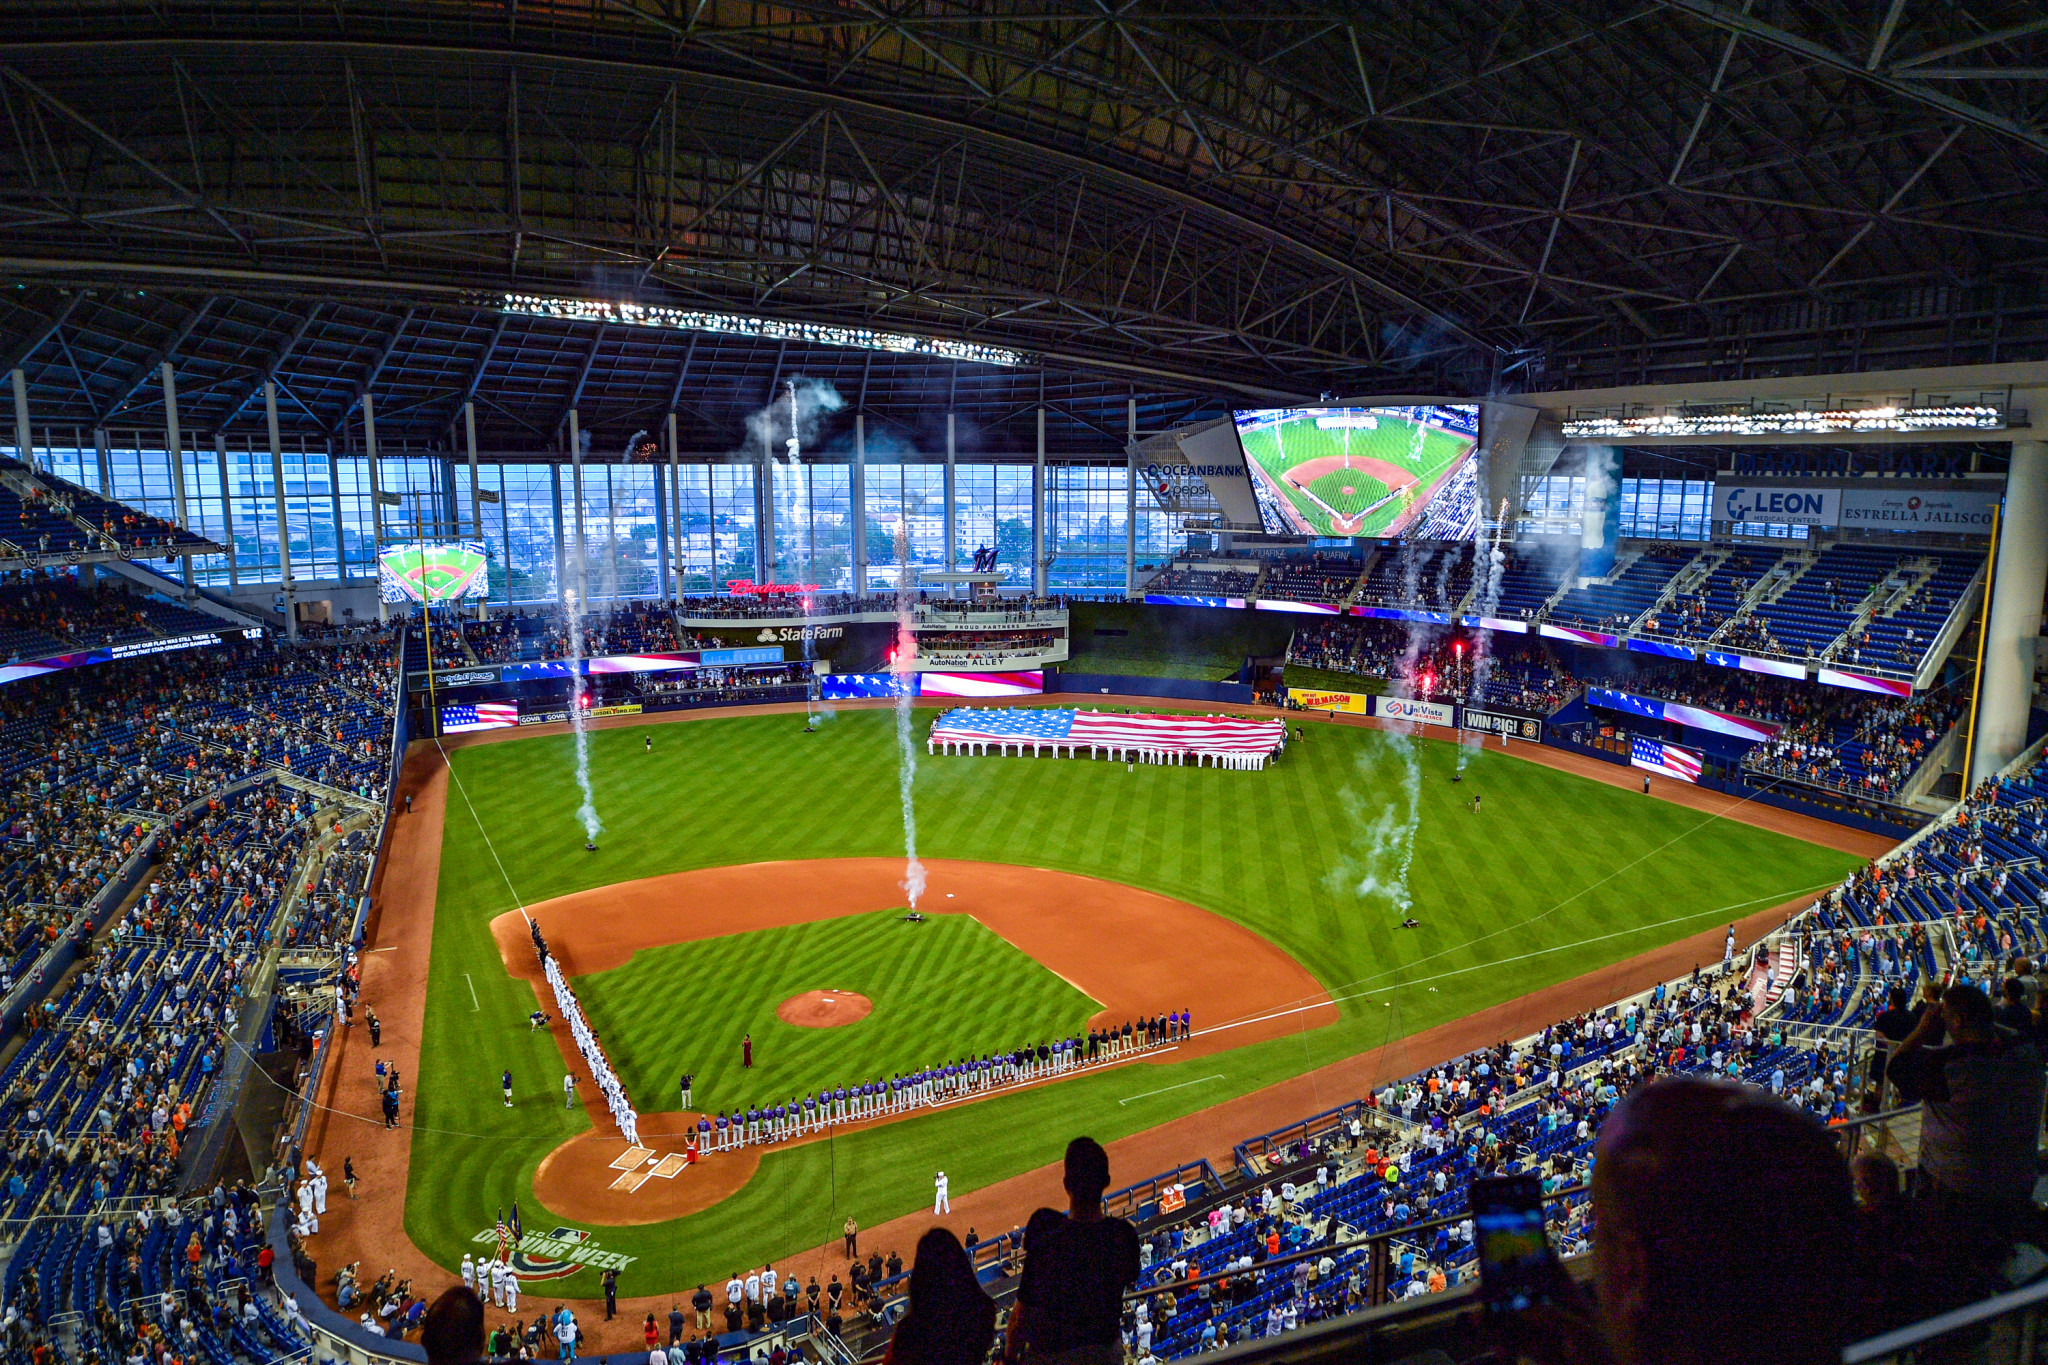 Marlins Park will host the 2021 World Baseball Classic final ©Getty Images